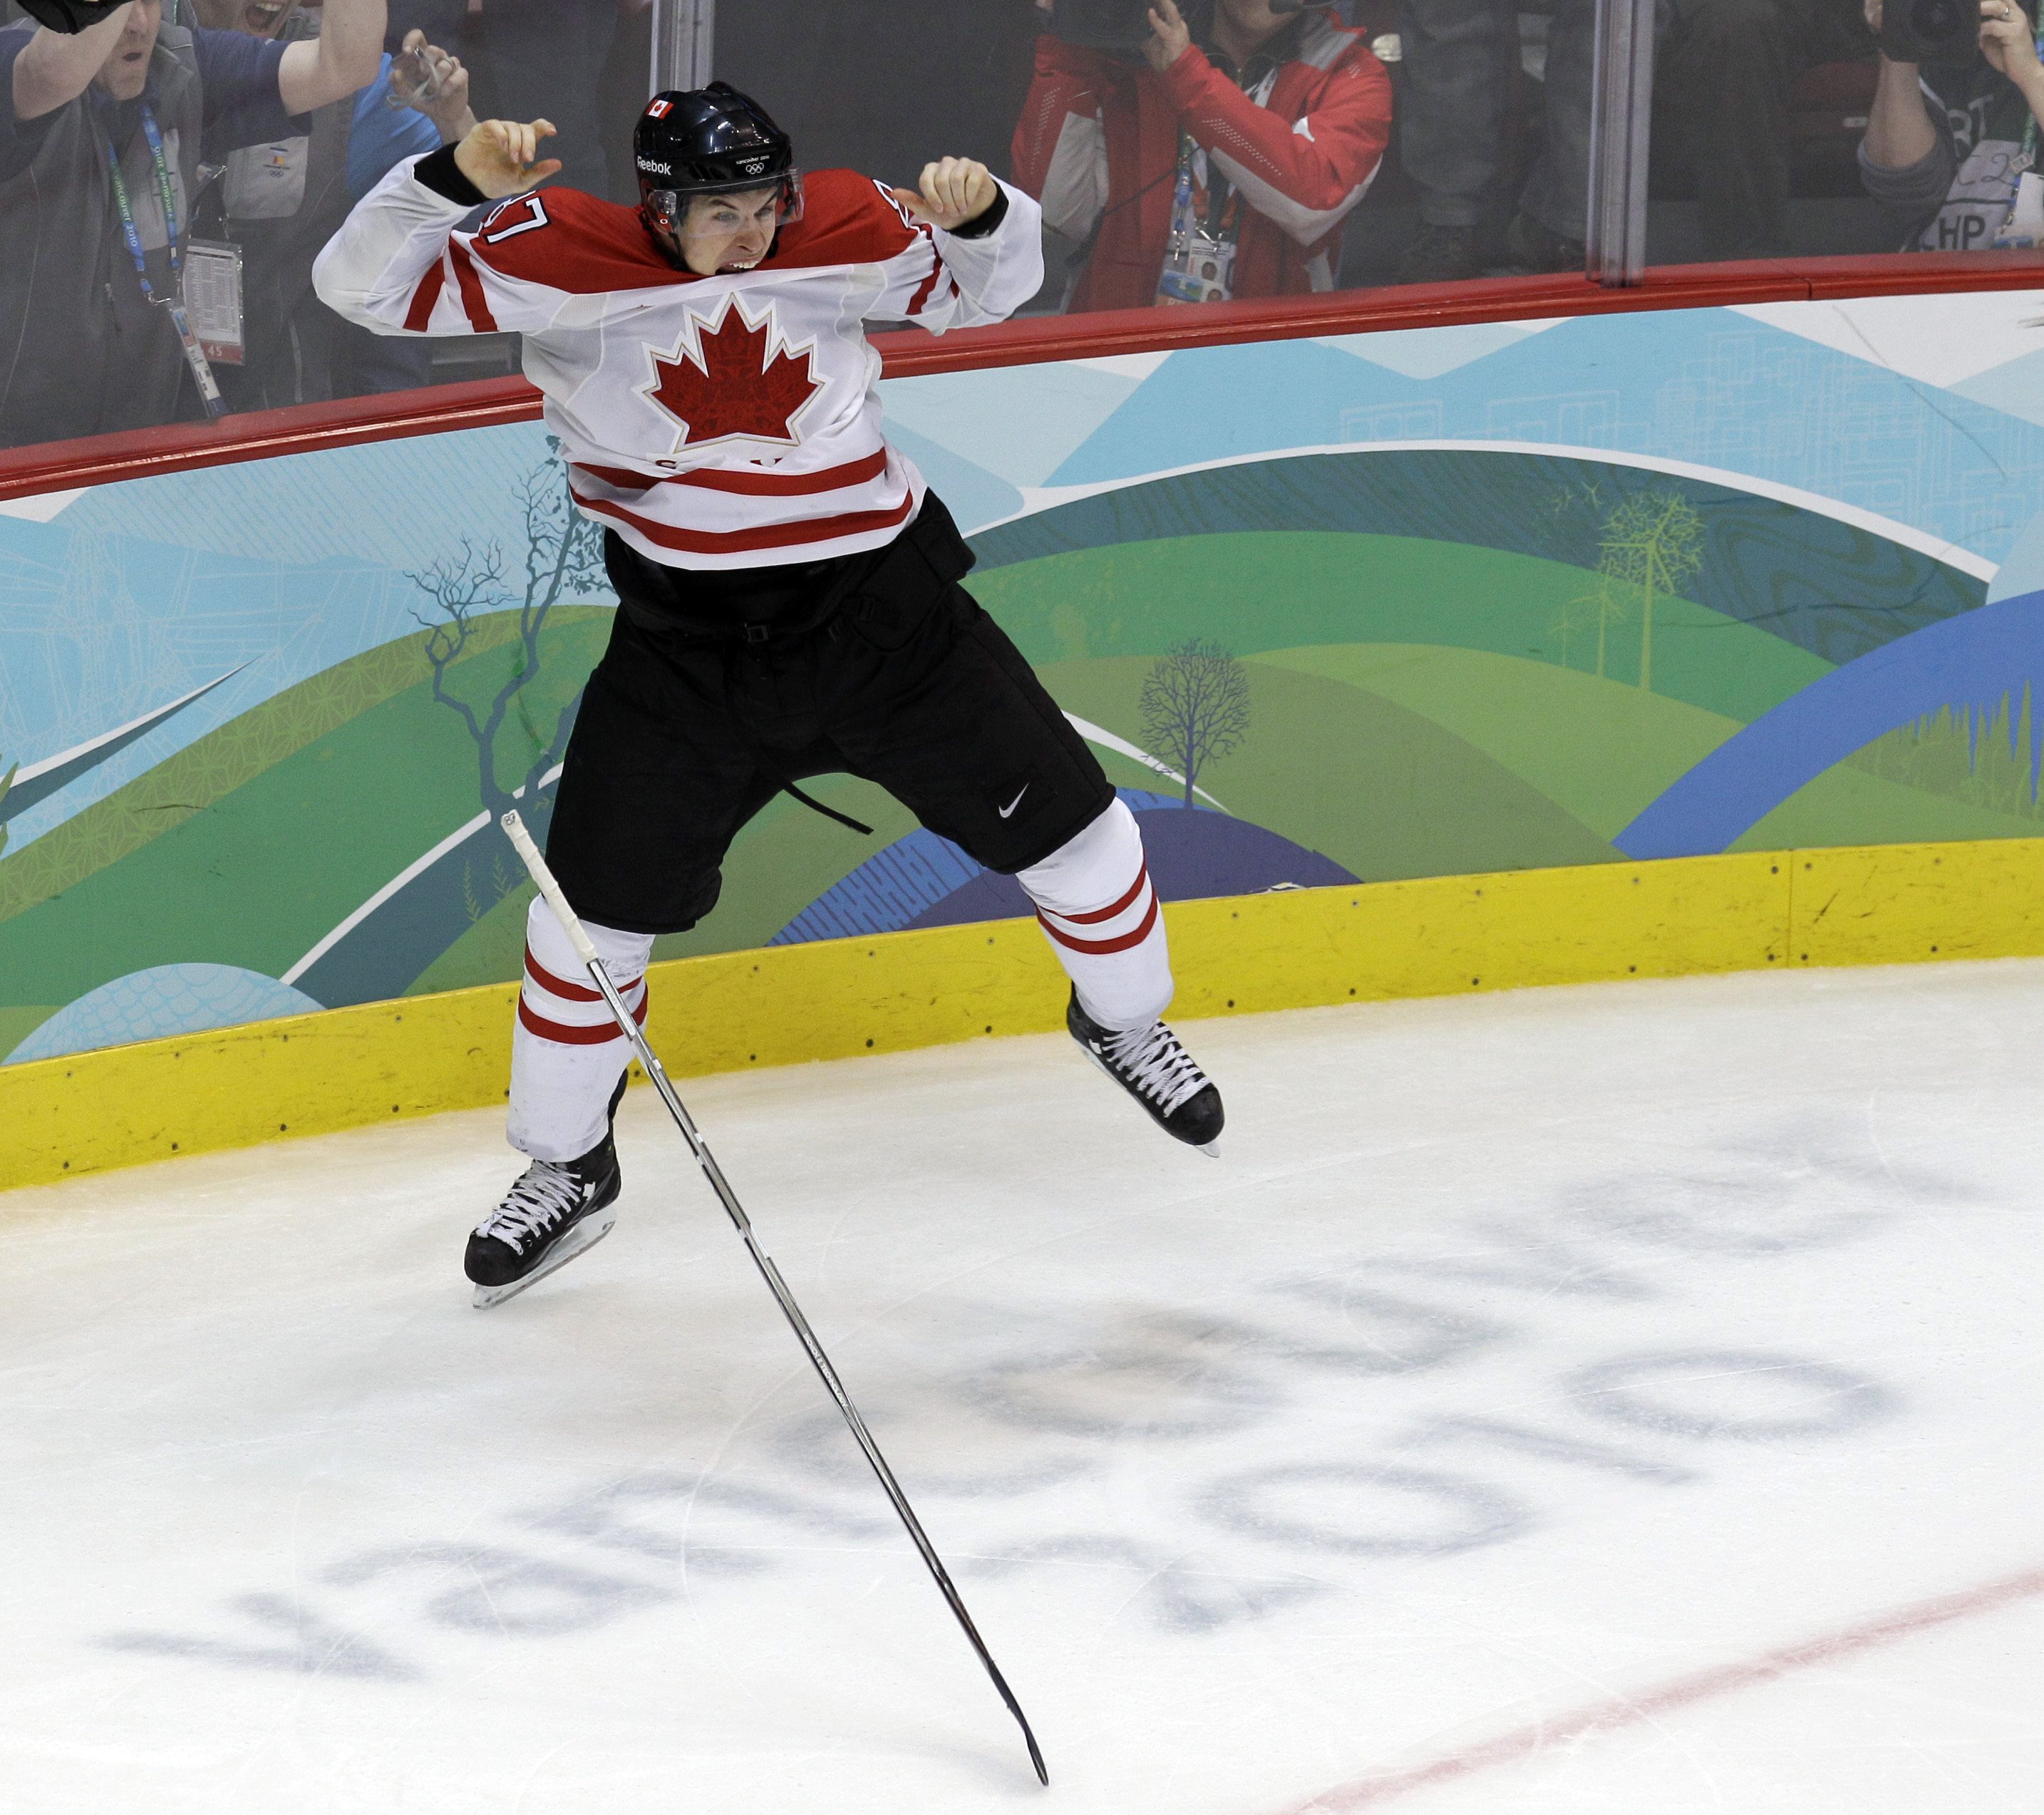 Sidney Crosby's hockey stick falls to the ground as he celebrates his winning goal at the Vancouver 2010 Olympics.